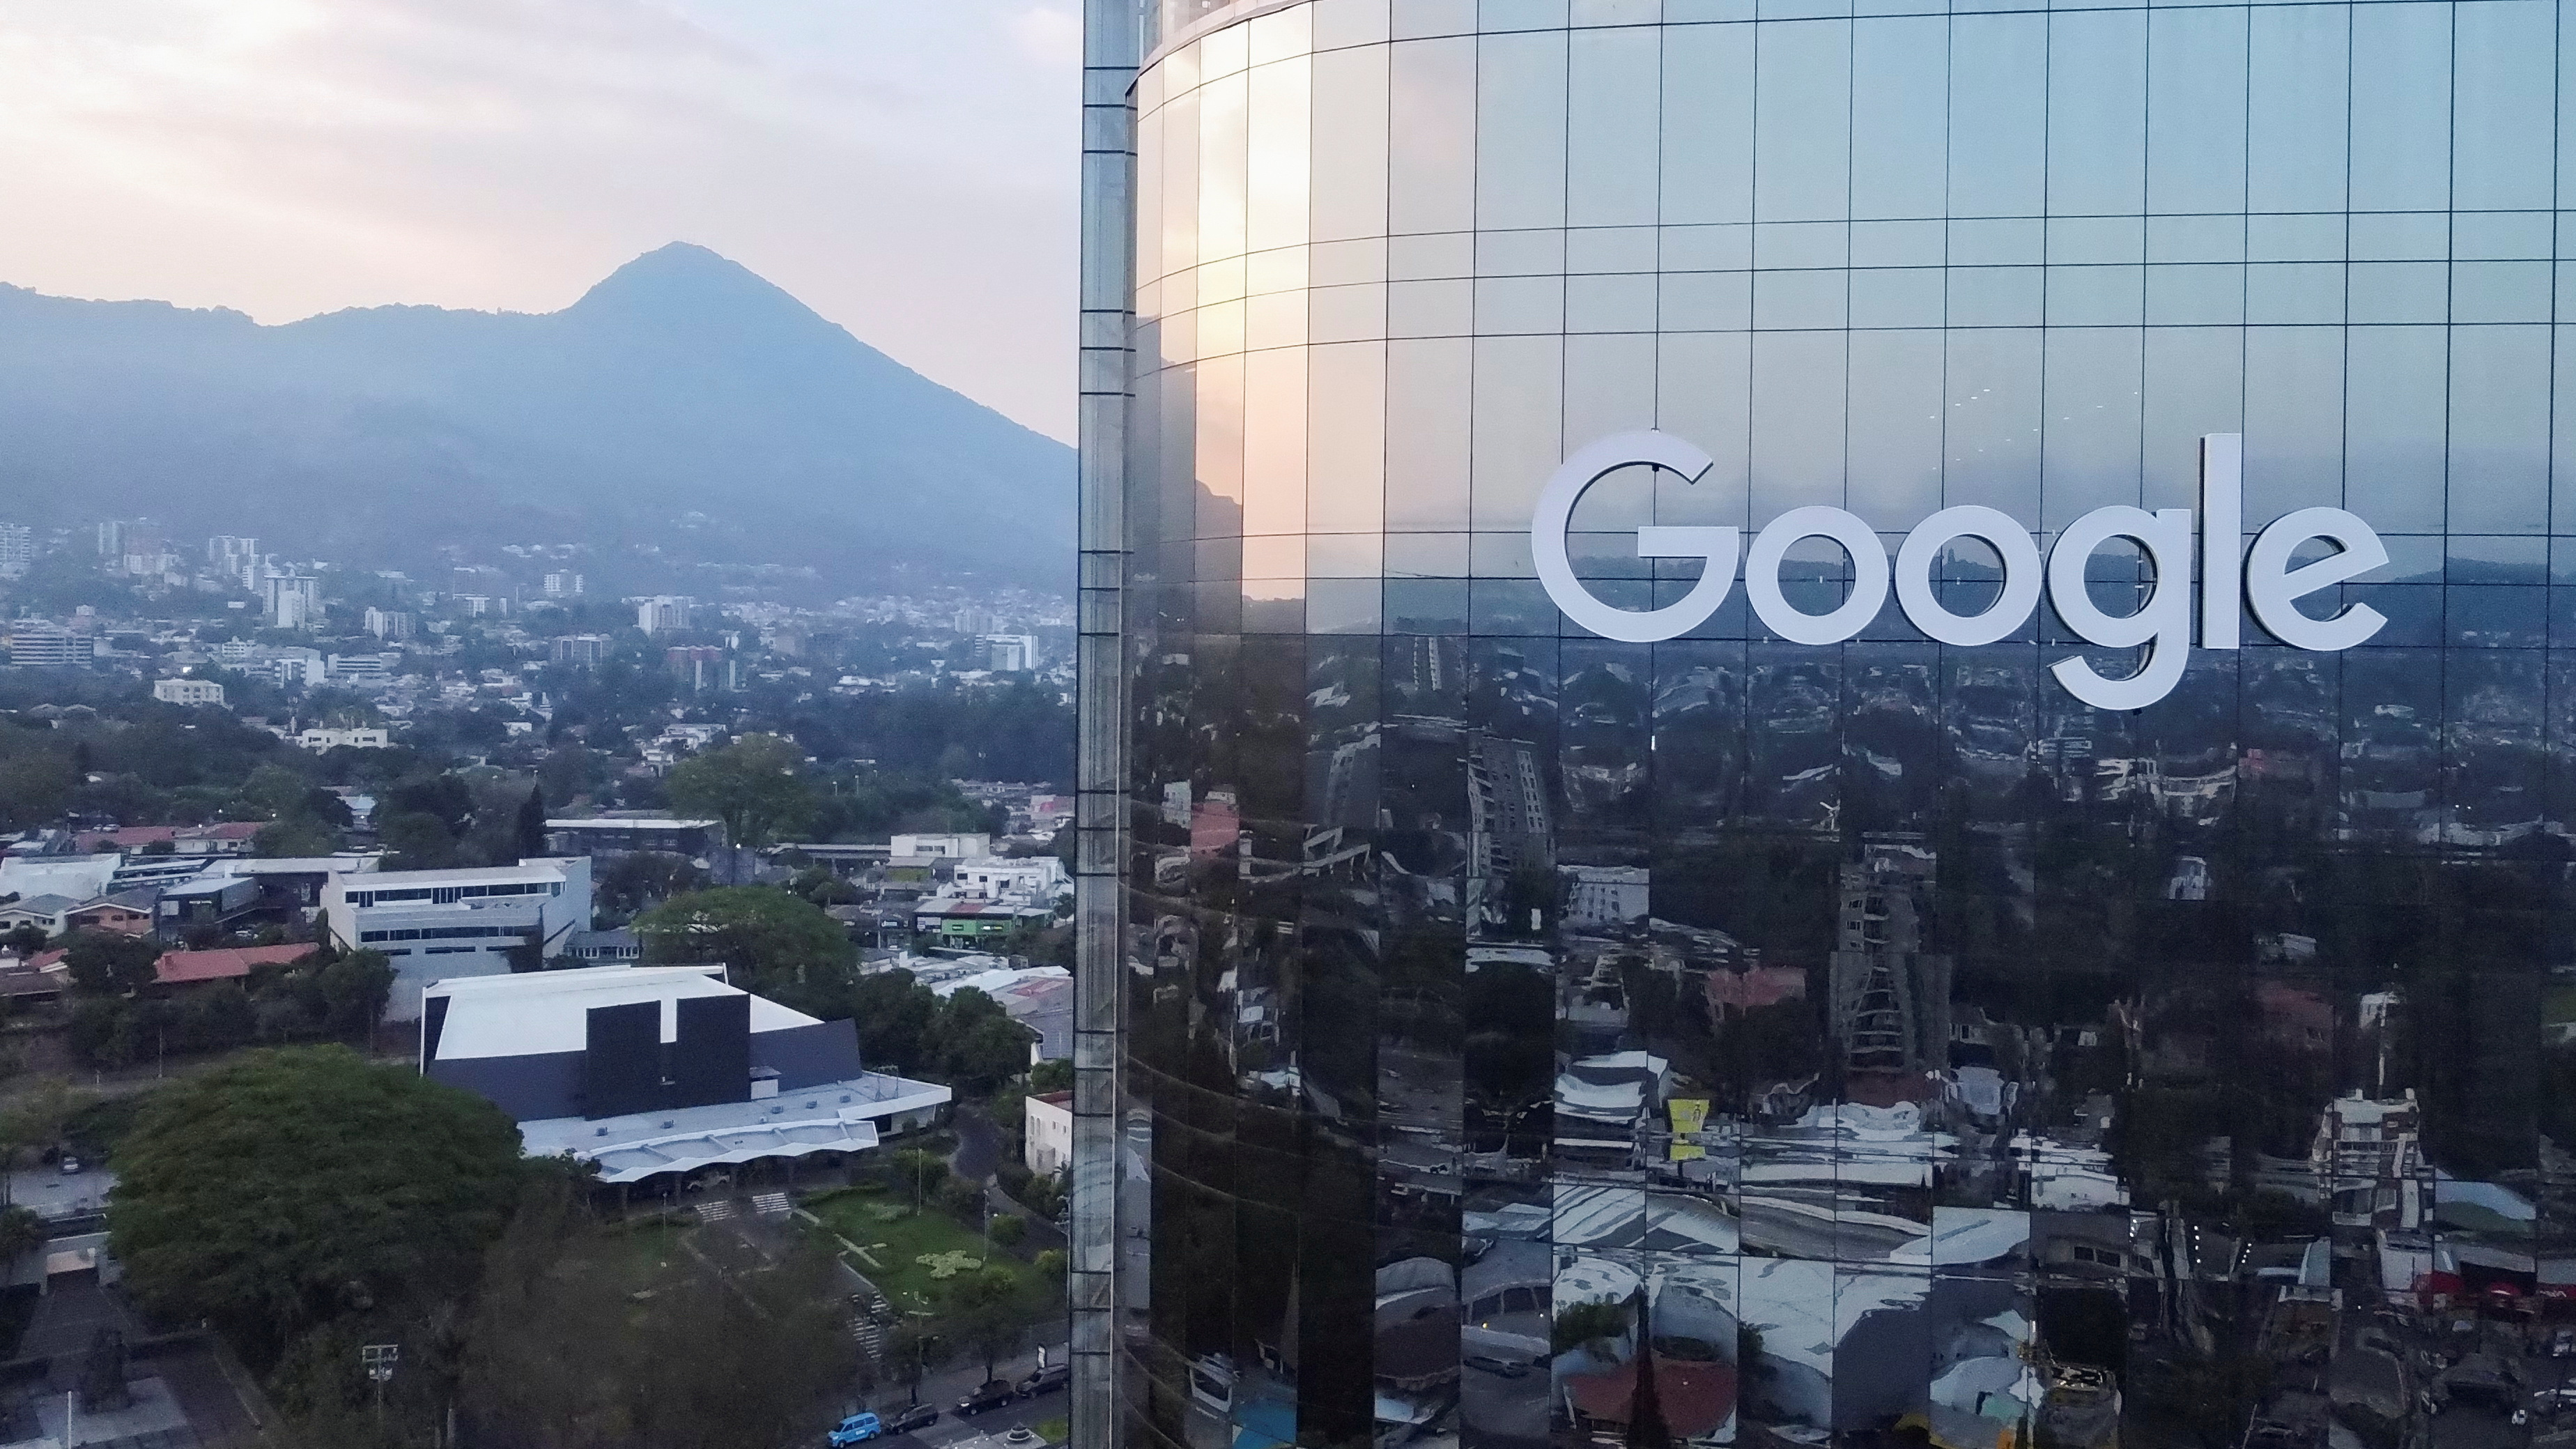 A view of the Google logo on a building in San Salvador